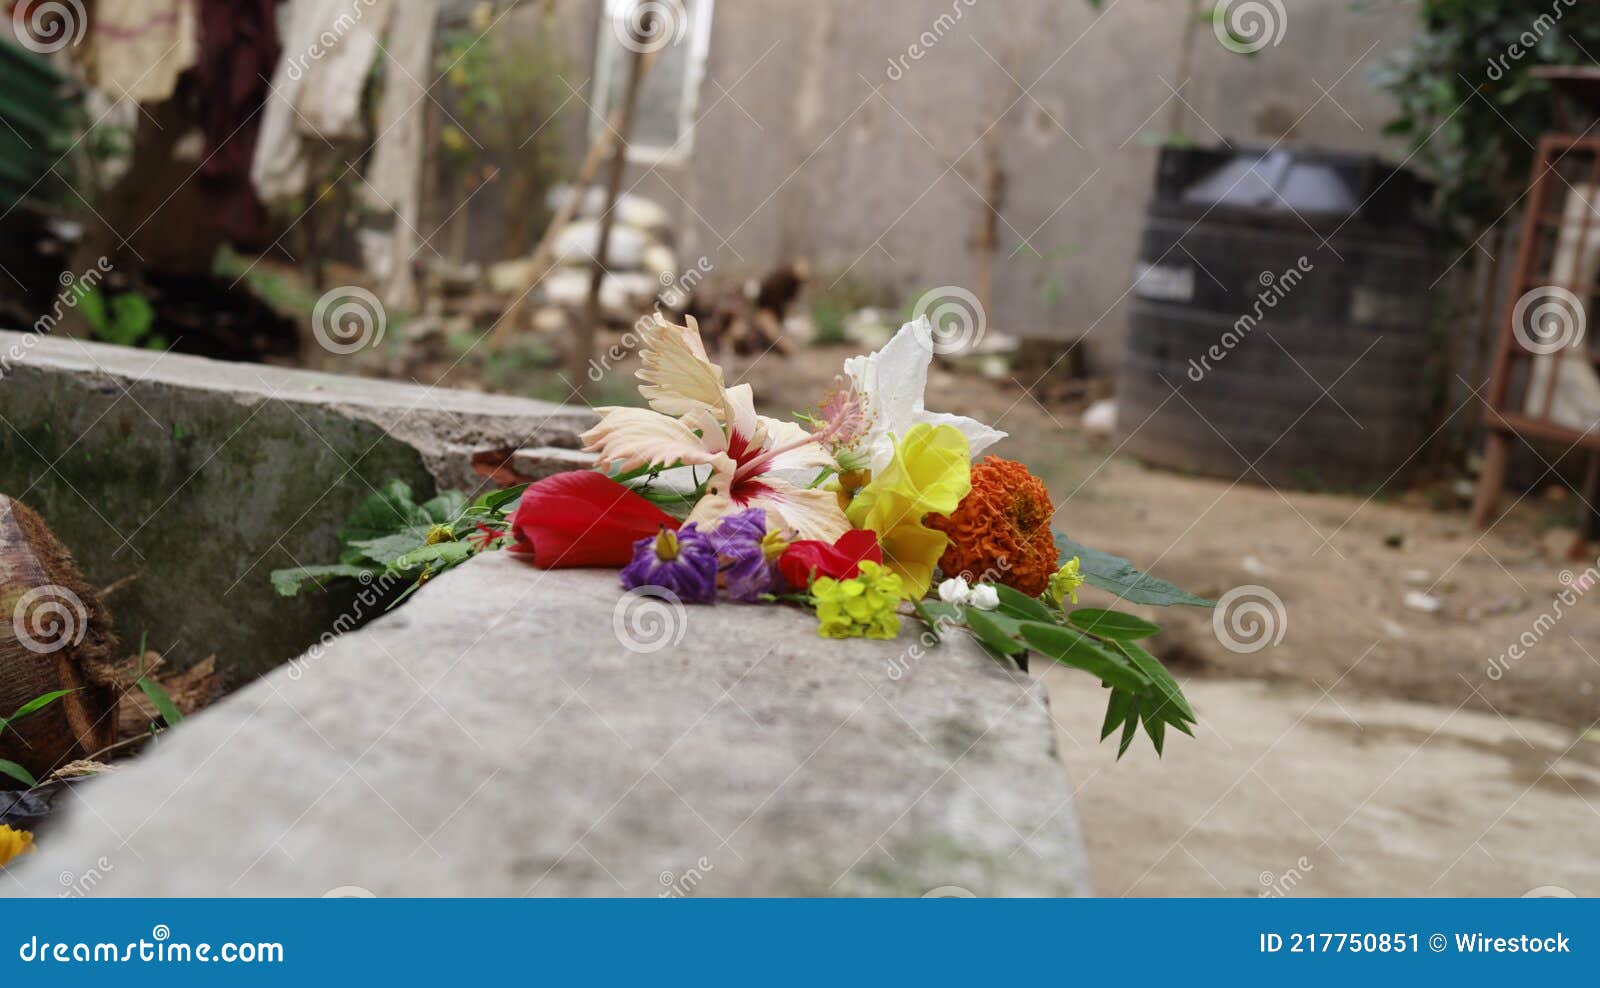 bouquet with different flowers on a borde